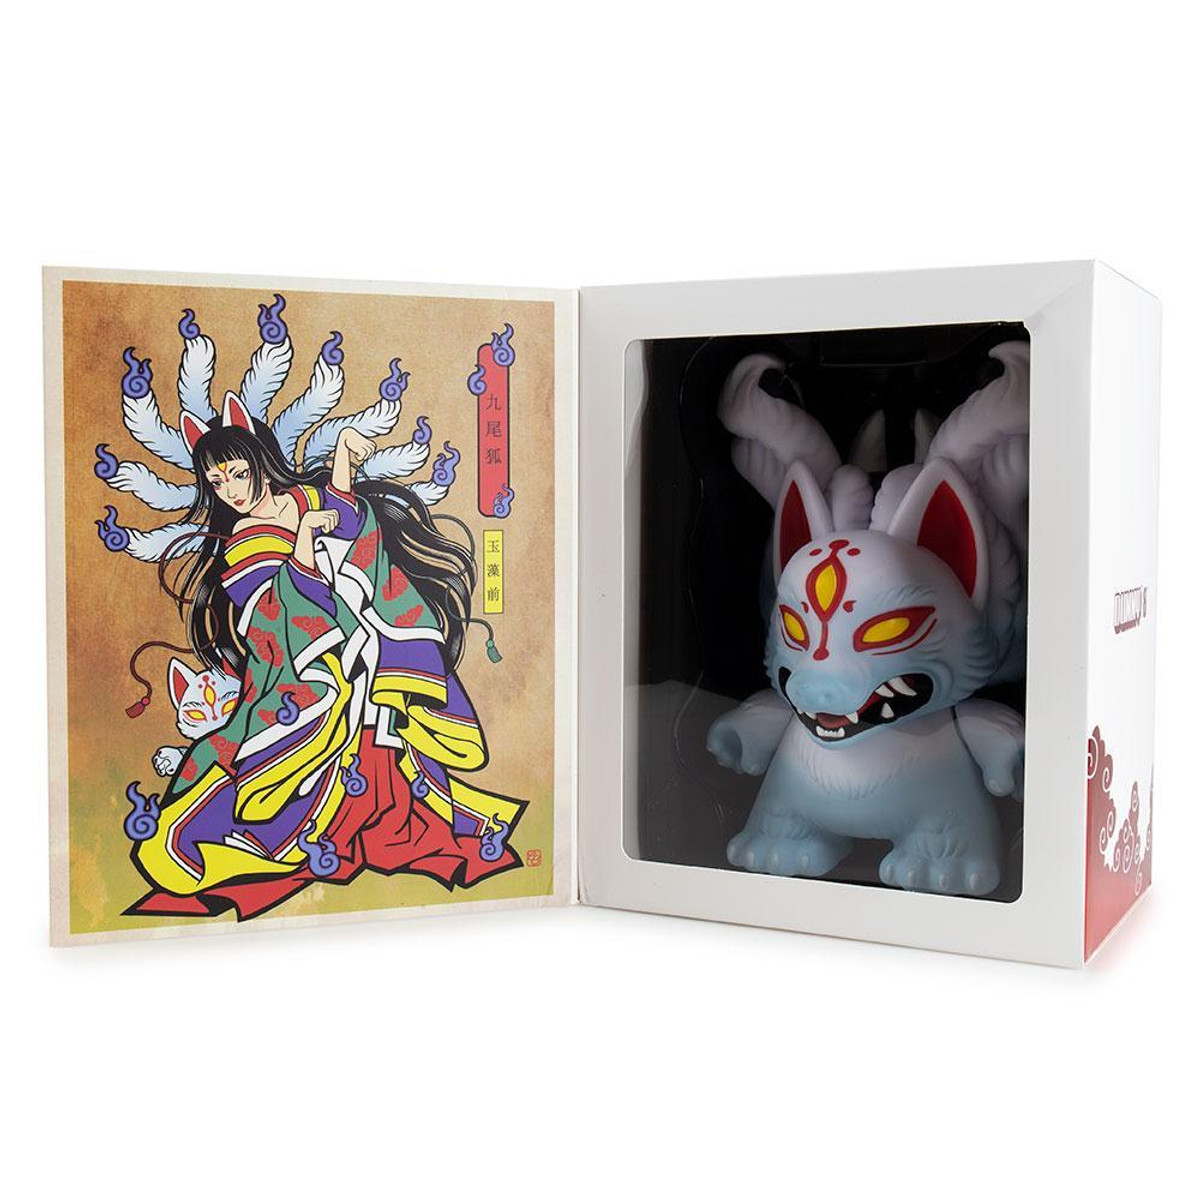 kyuubi dunny 8" candie bolton